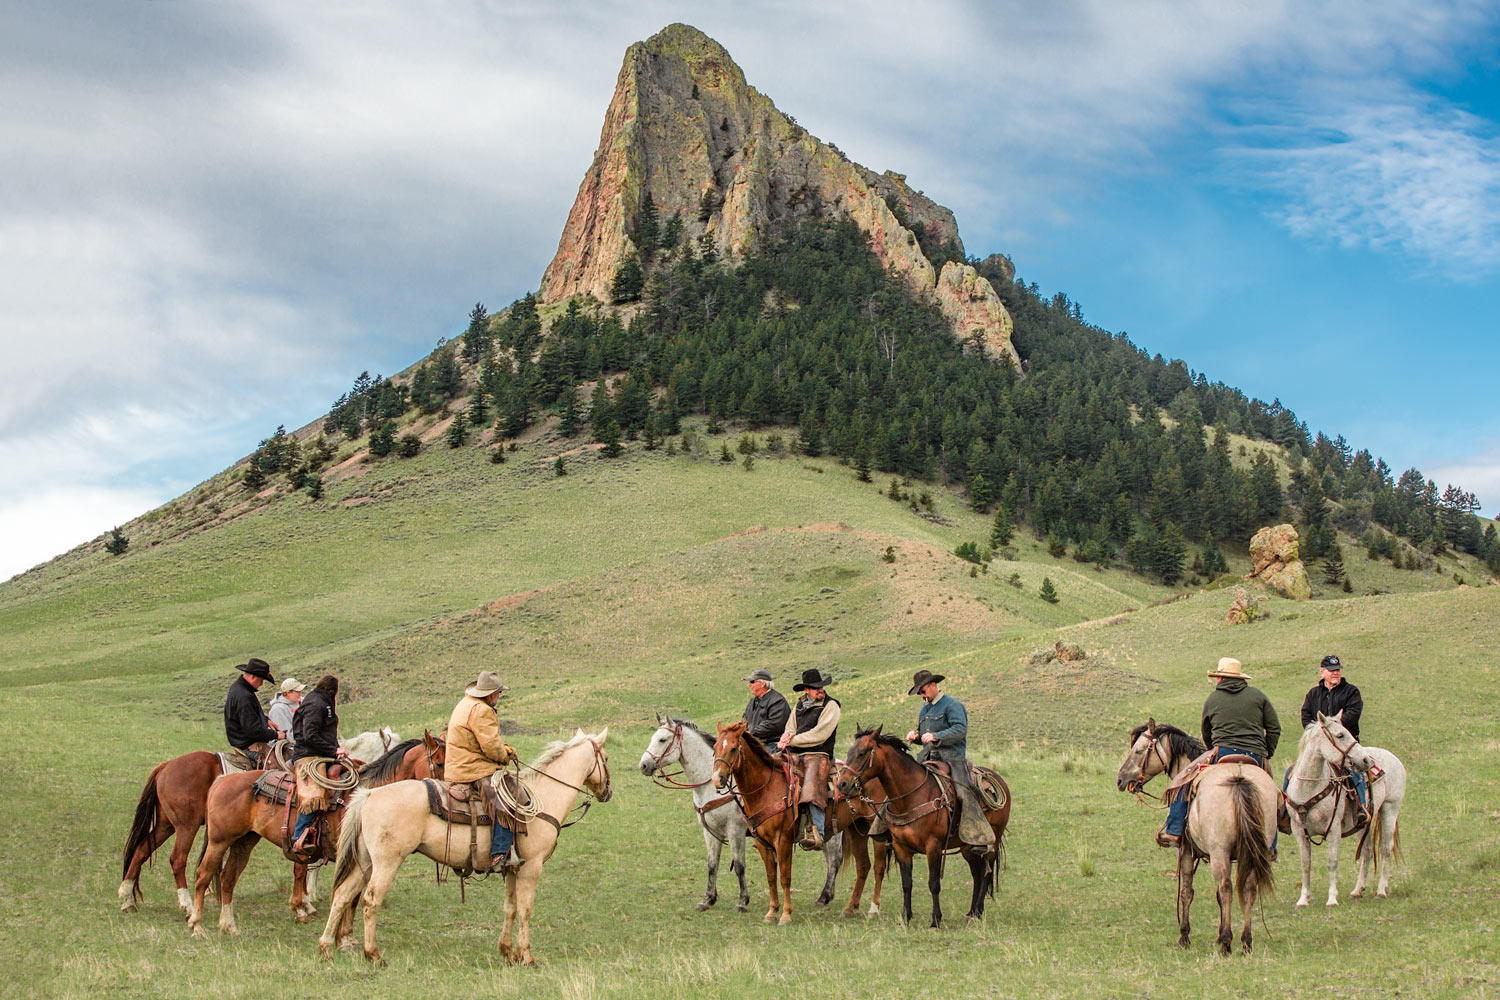 Cowboys and cowgirls gather at the base of Birdtail Butte near Cleveland, Montana.&nbsp;→ License Photo